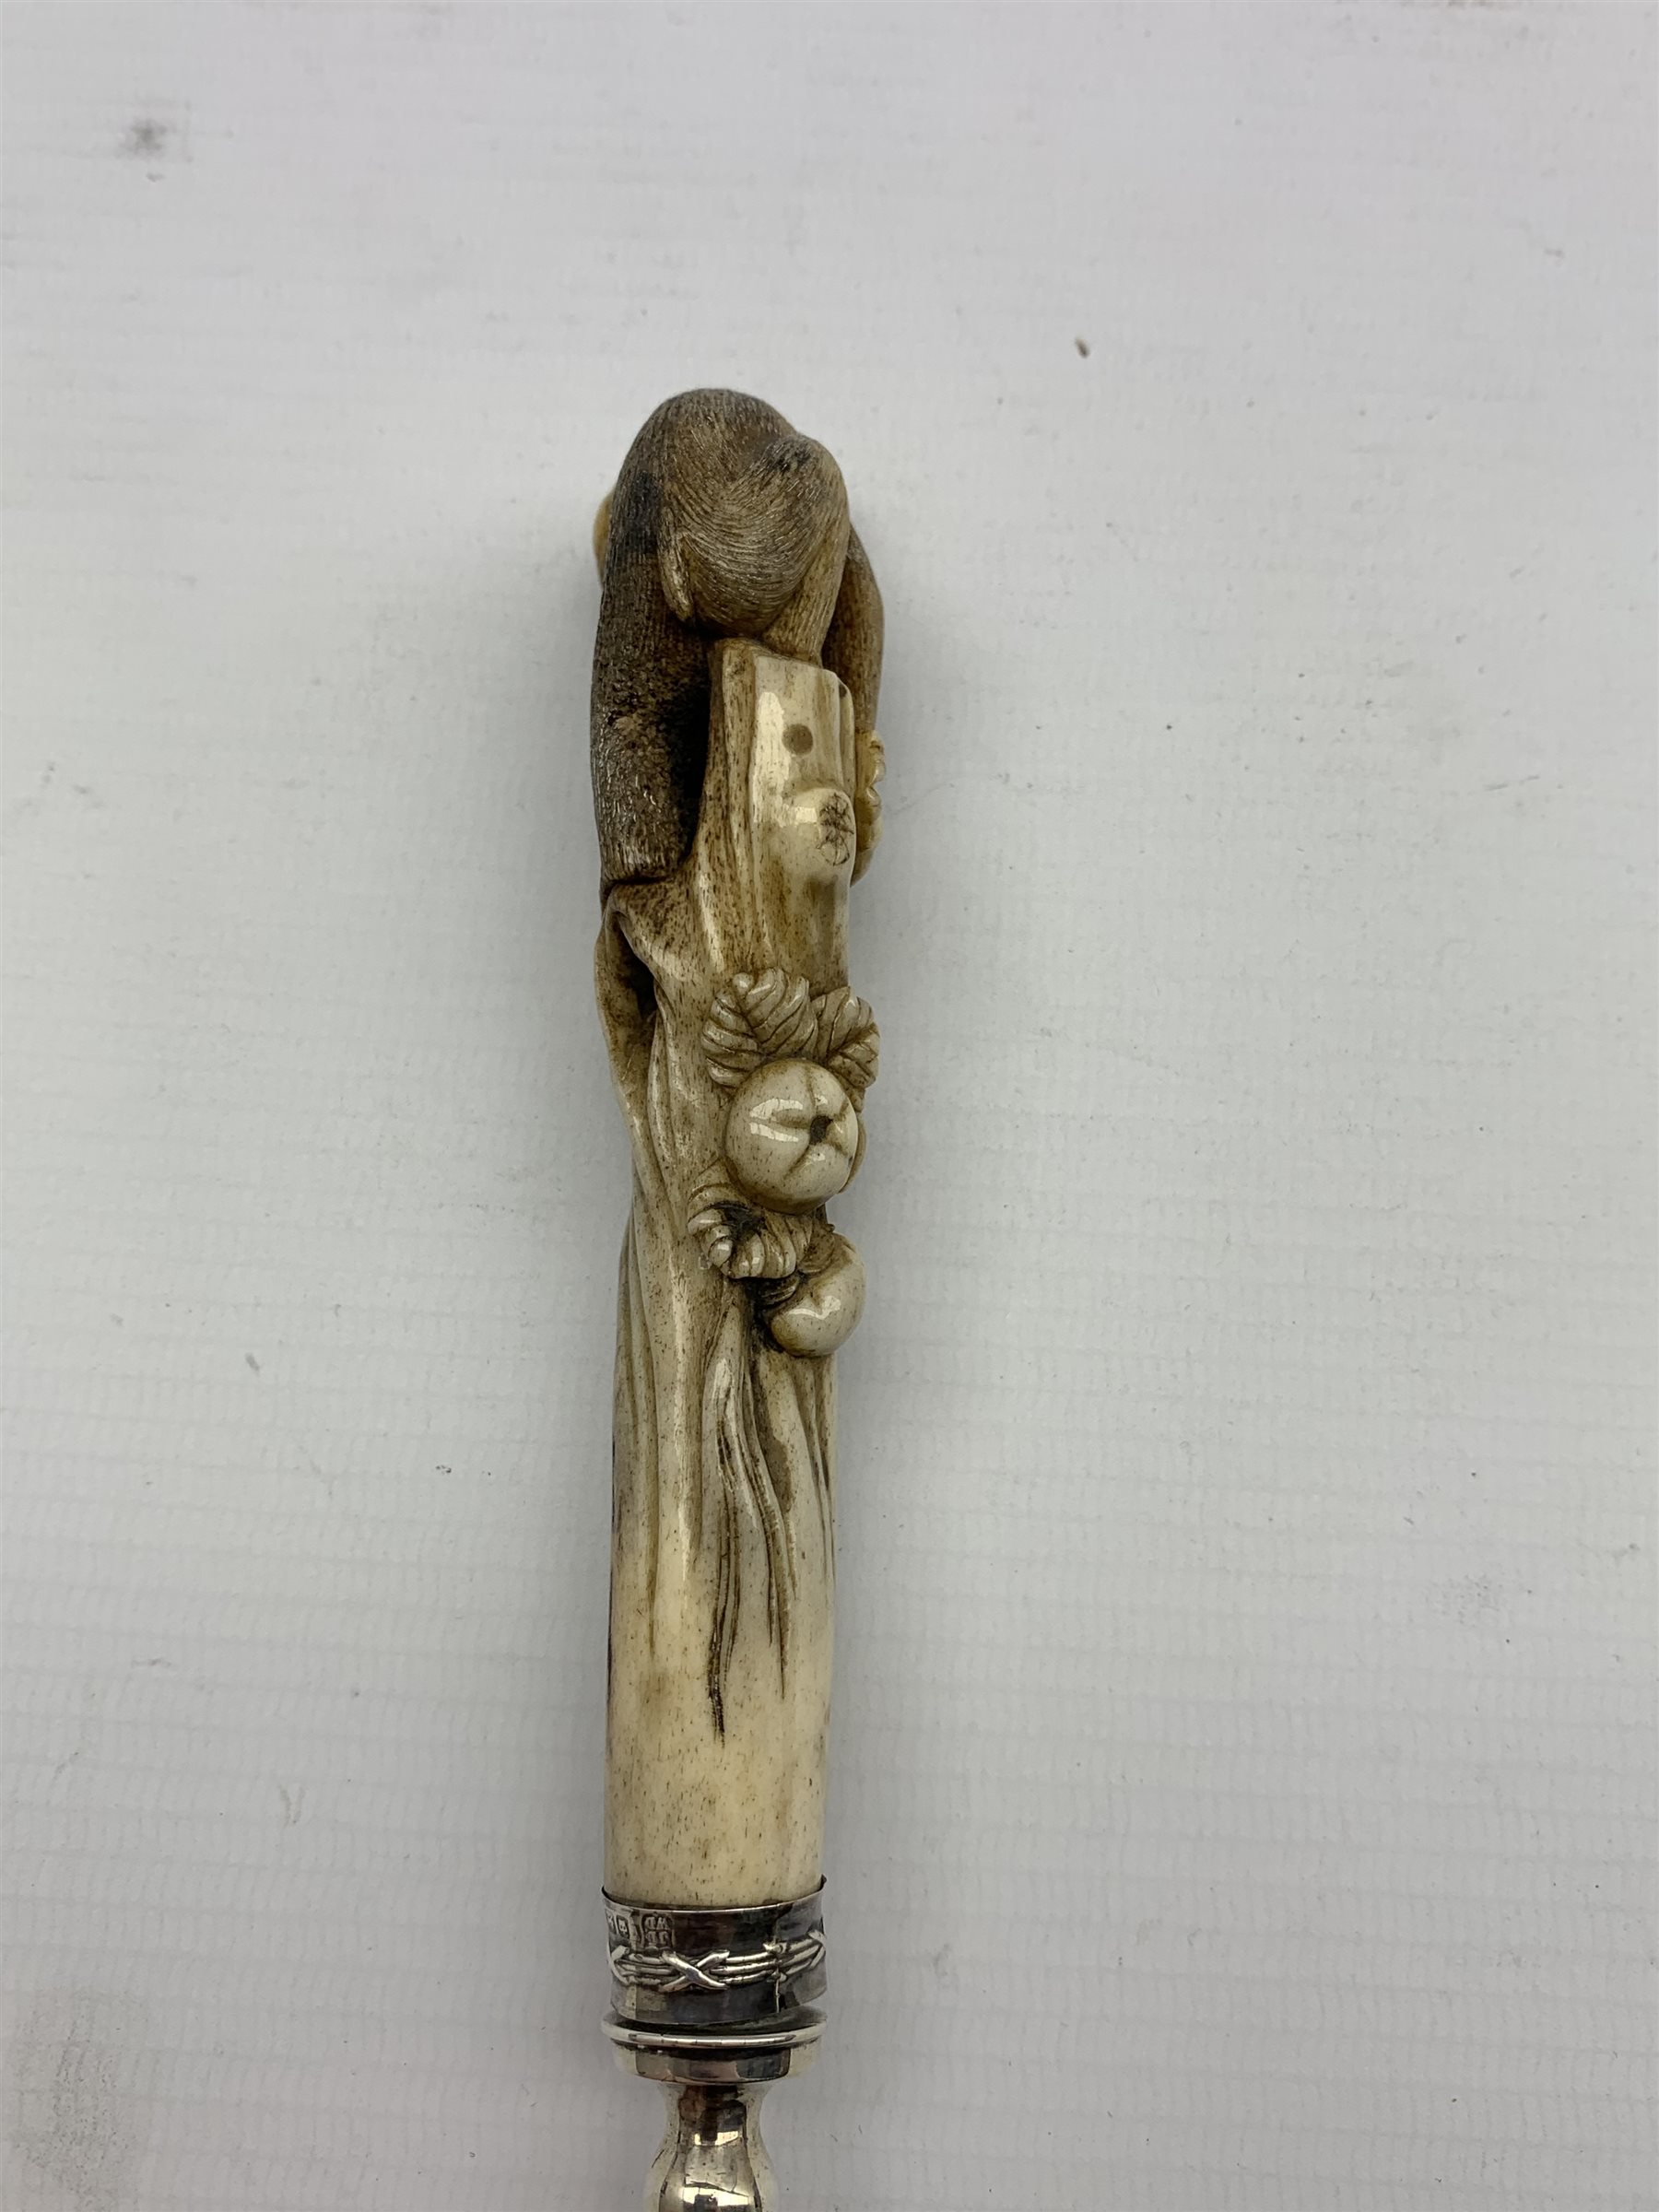 Edwardian silver and bone letter opener, the handle finely carved as a Monkey gathering fruit by Jam - Image 5 of 6